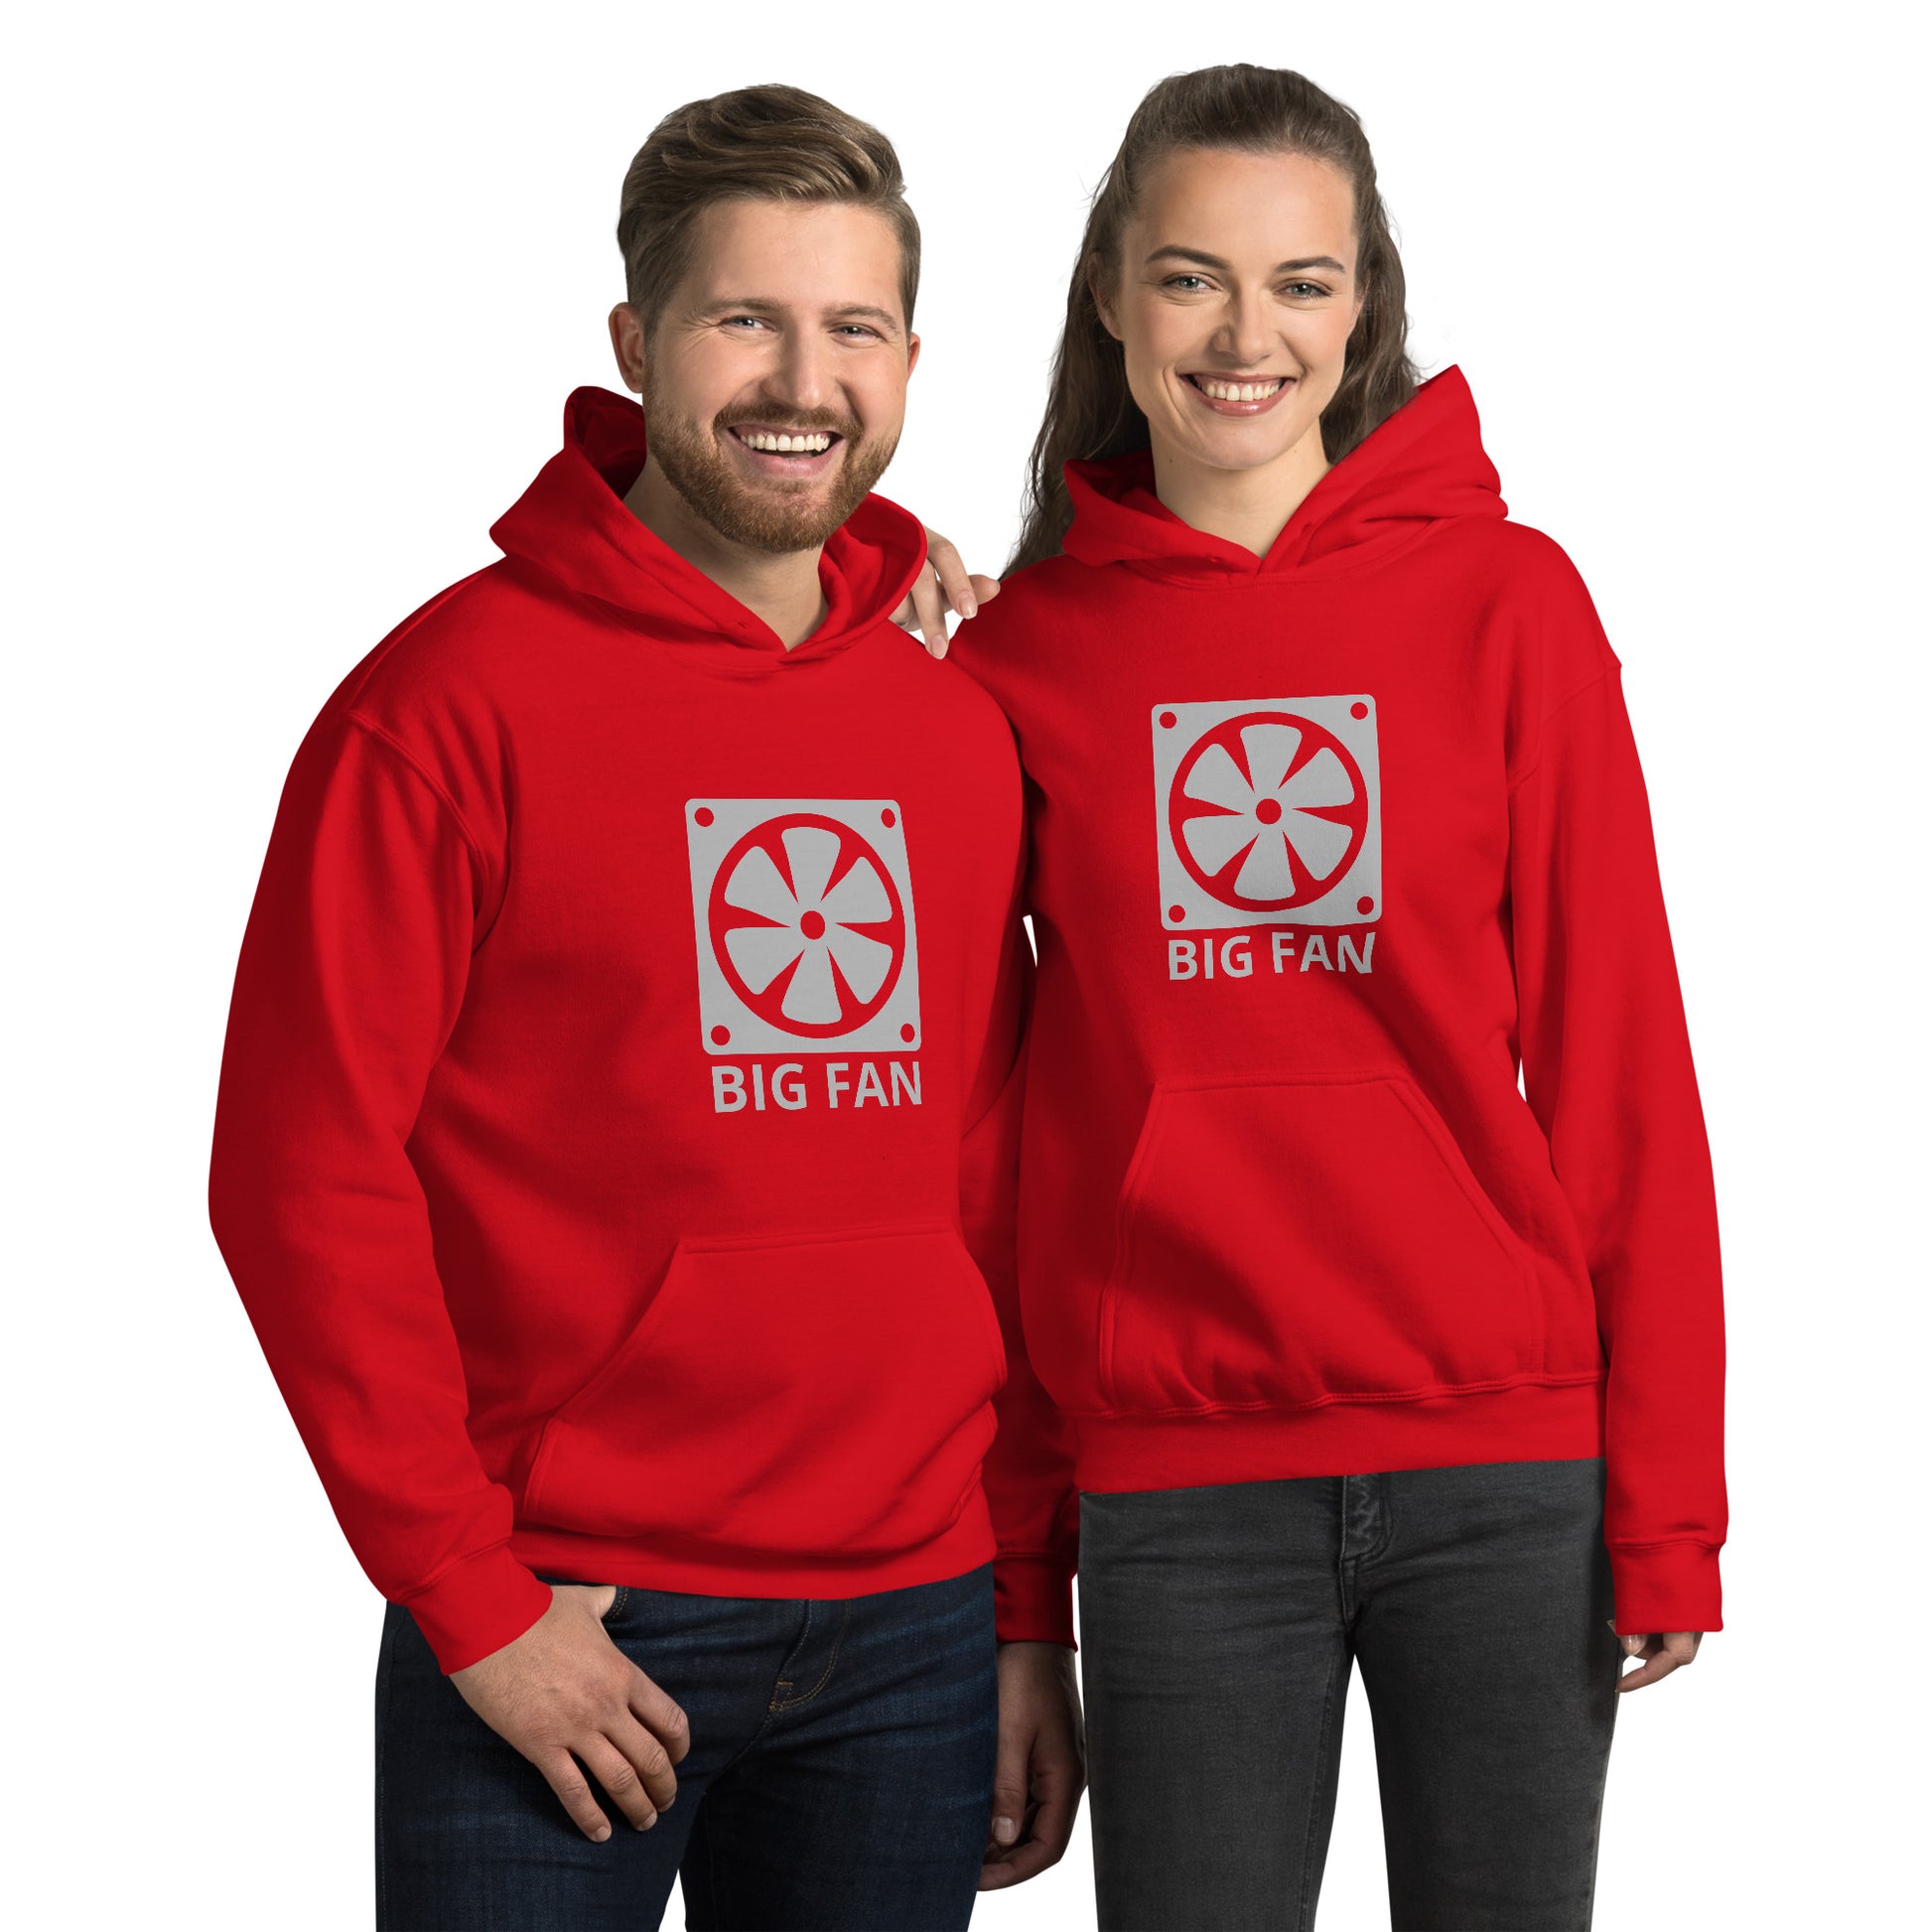 Man and women with red hoodie with image of a big computer fan and the text "BIG FAN"